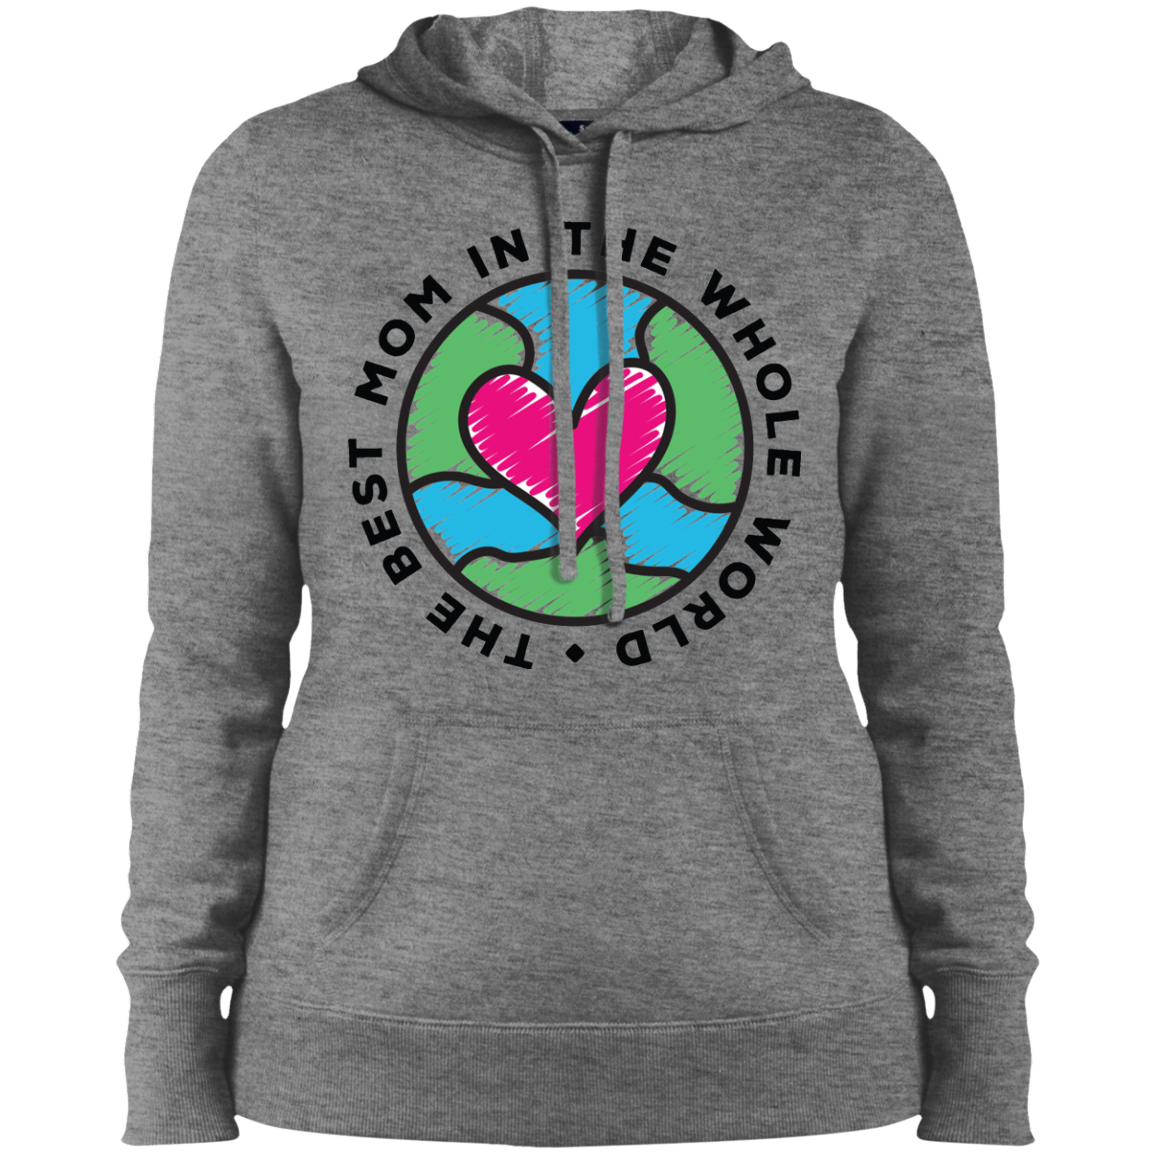 this image is used to give an example of print on demand mother's day hoodie